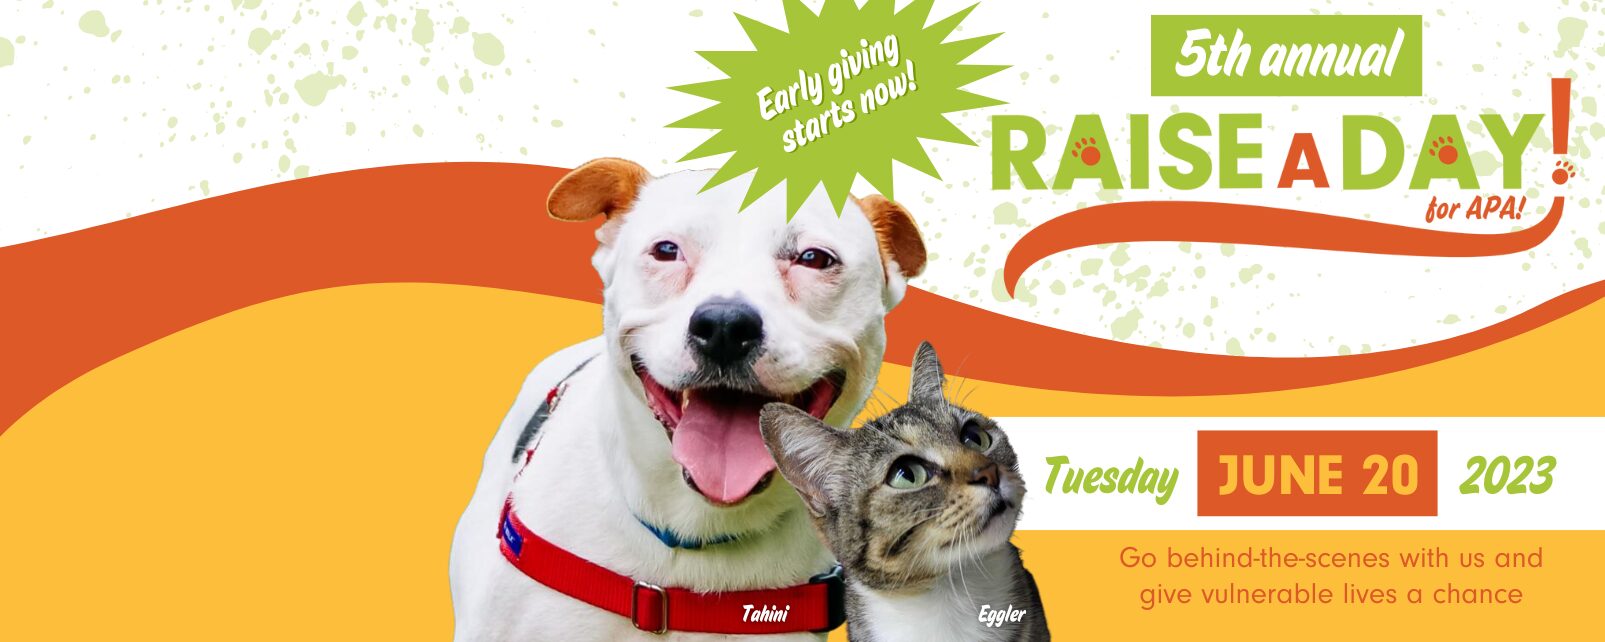 Raise a Day RAD 2023 web banner and logo